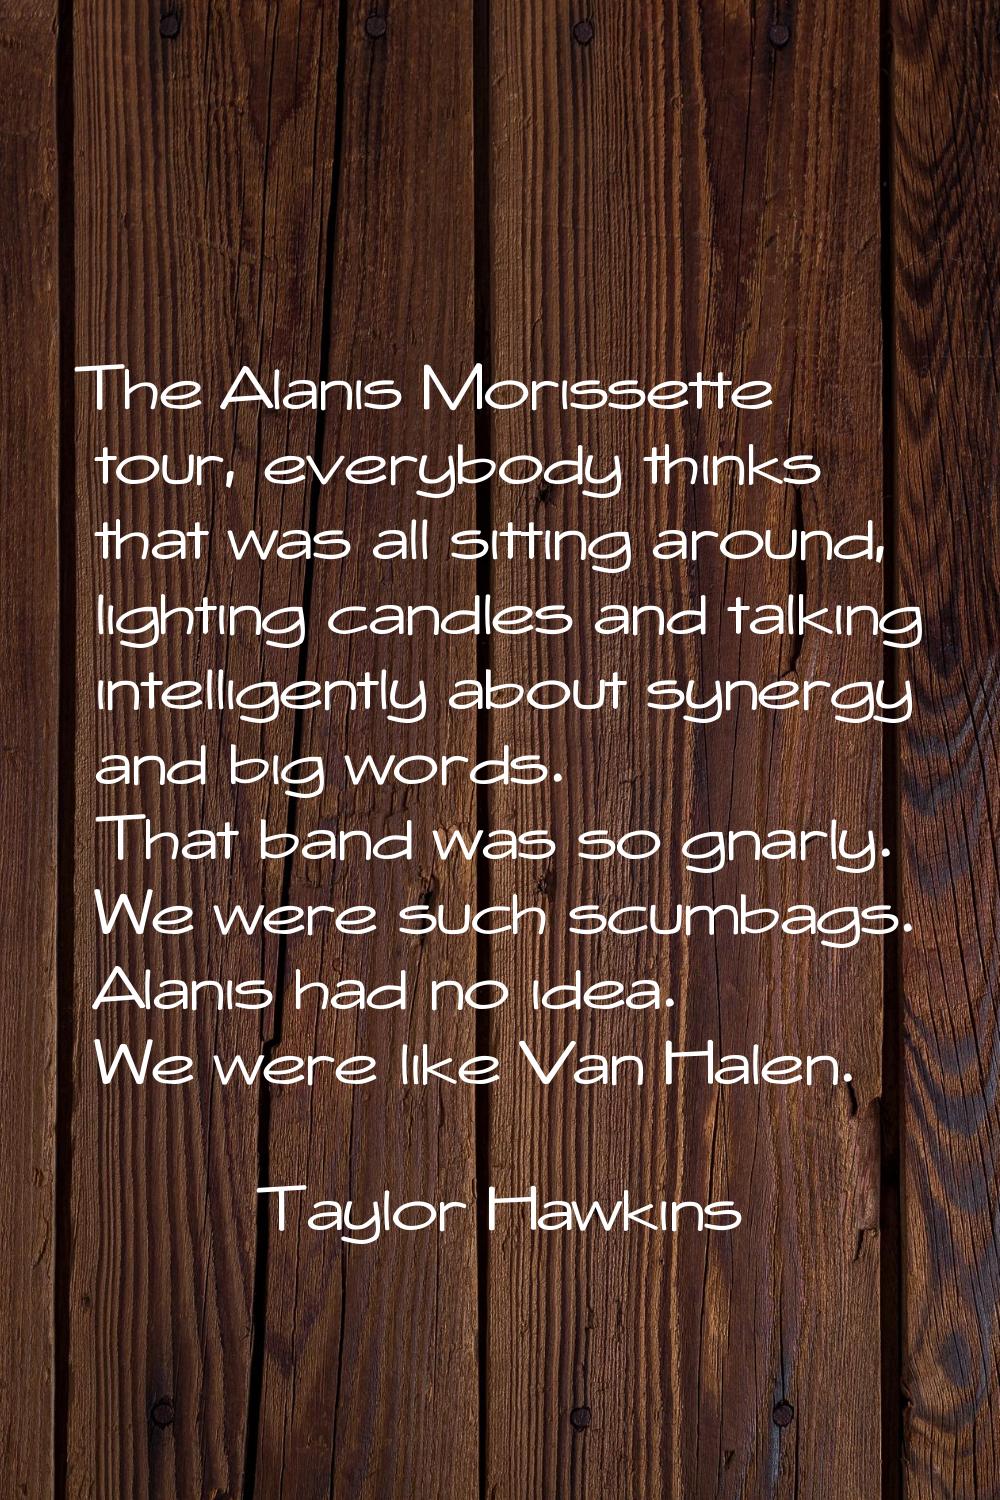 The Alanis Morissette tour, everybody thinks that was all sitting around, lighting candles and talk